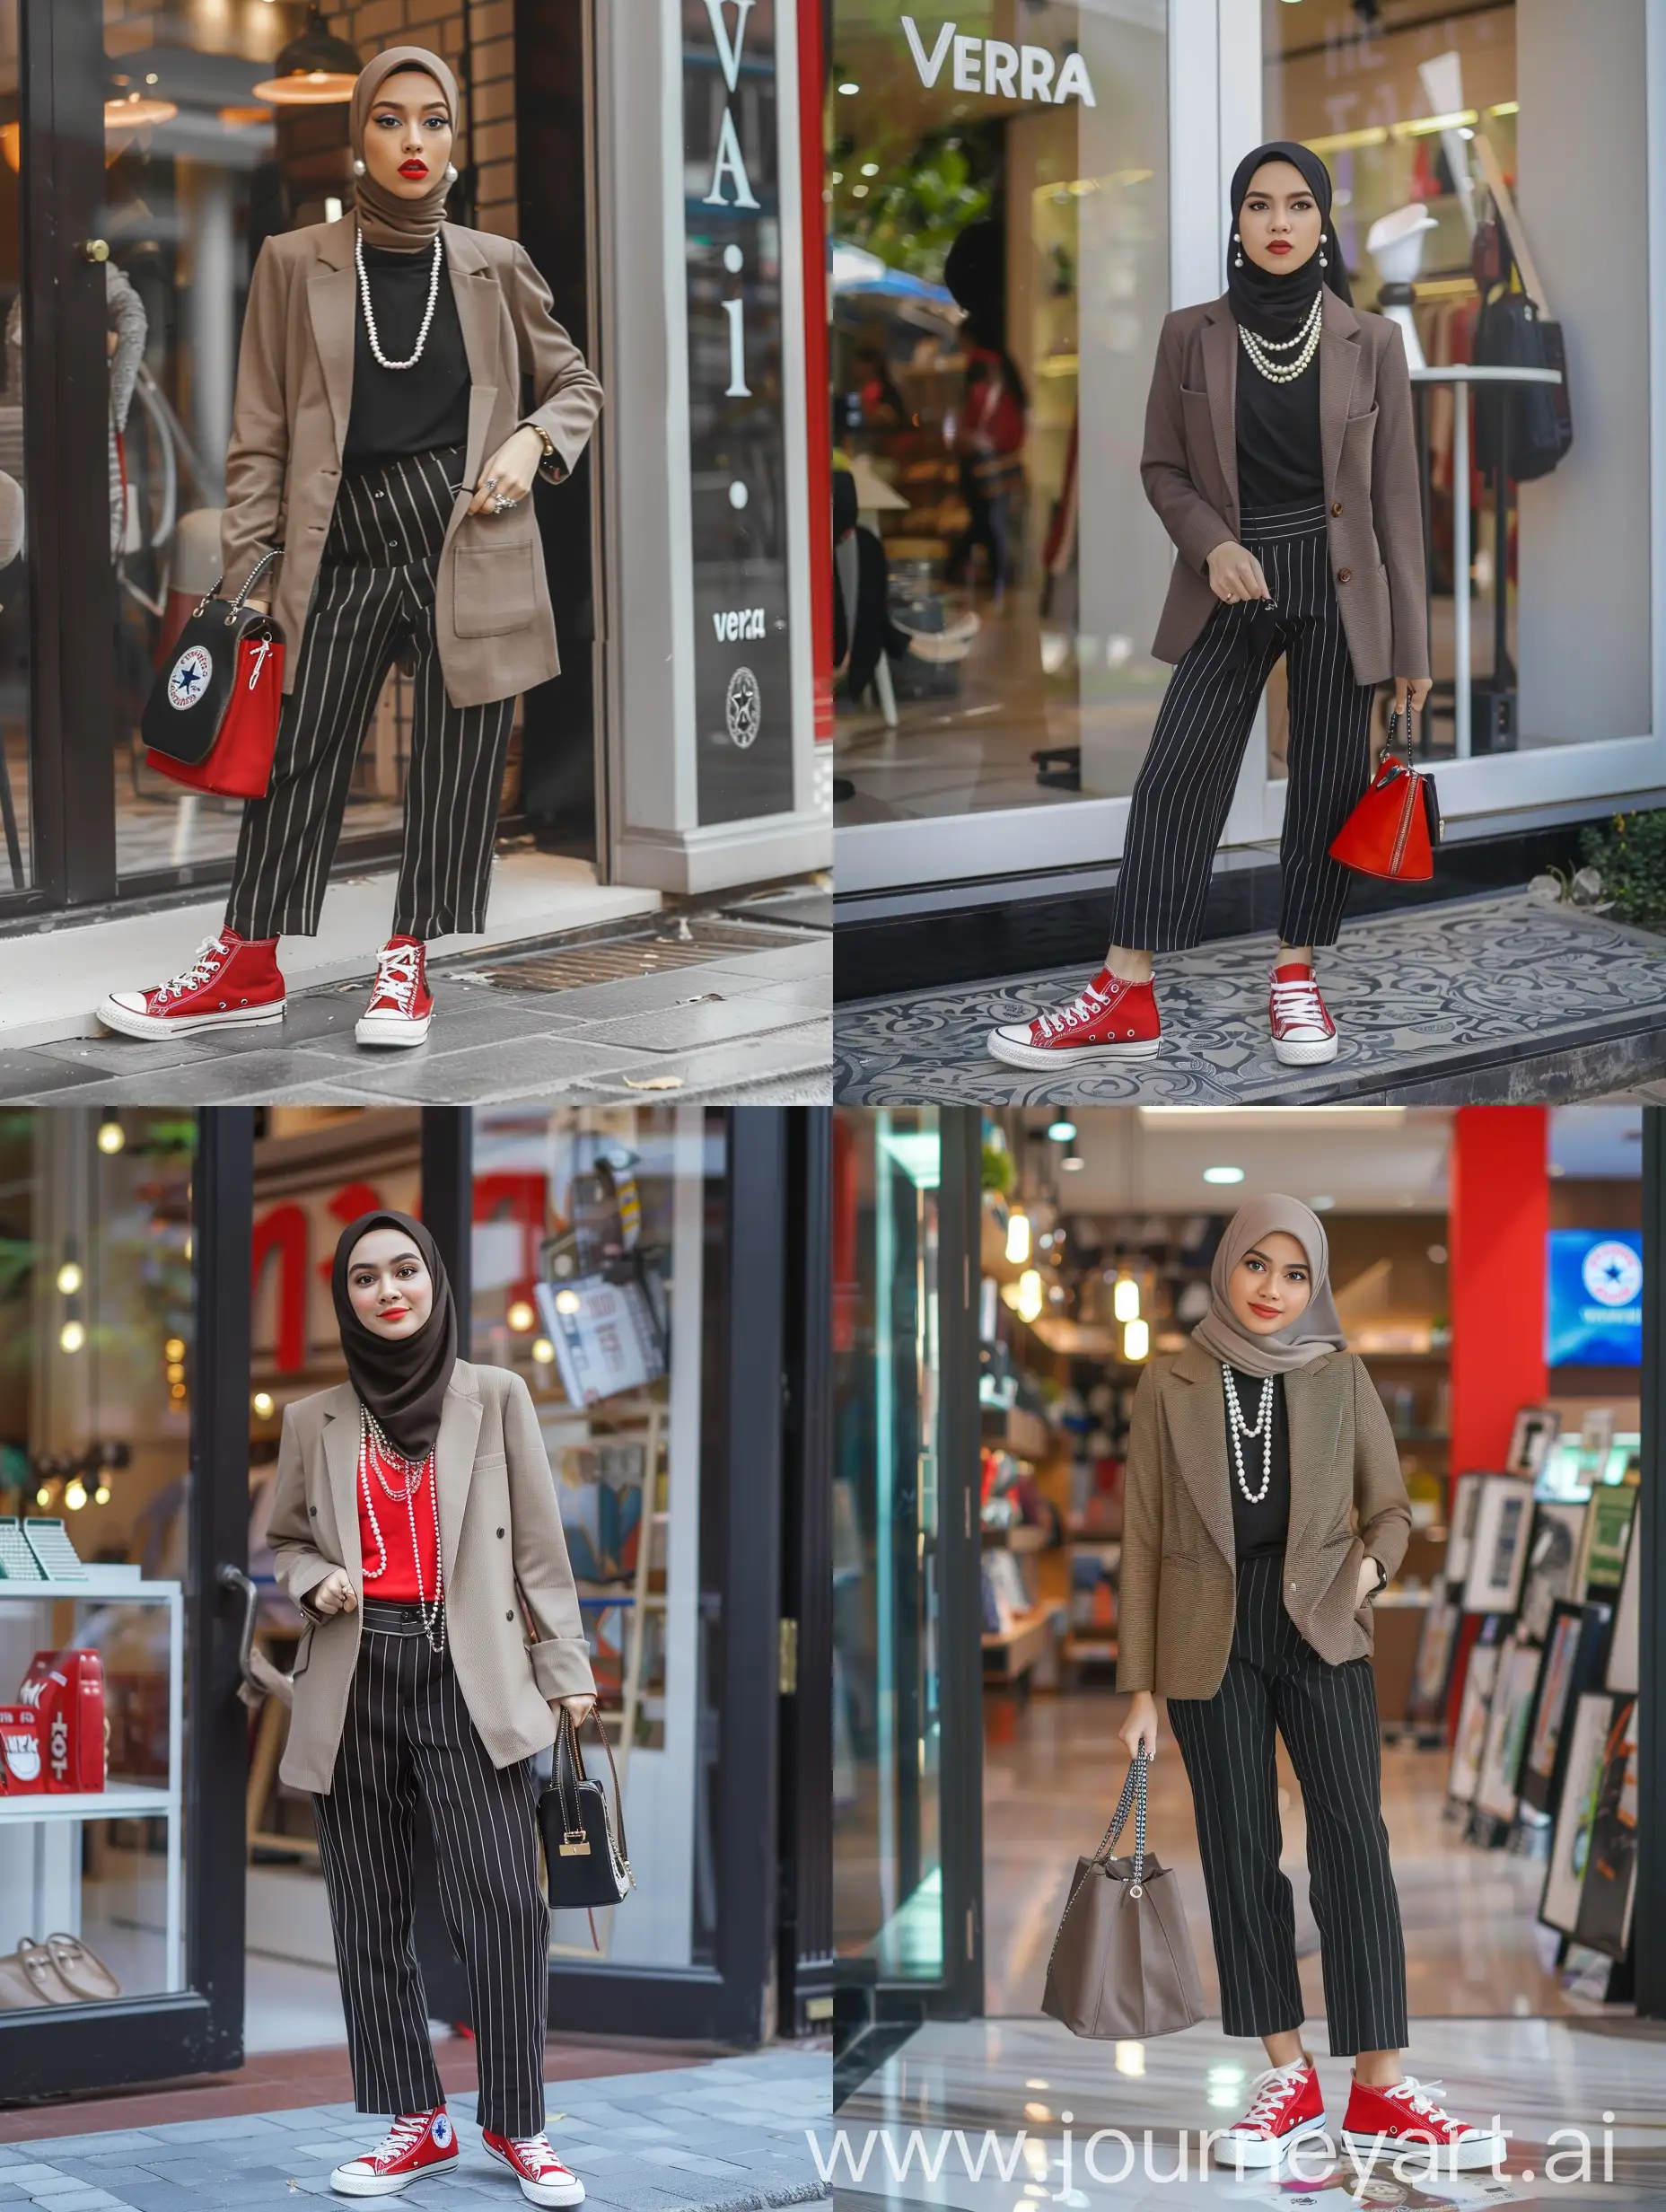 beautiful Indonesian hijab woman wearing a blazer and black striped women's pants, red converse chuck taylor shoes, pearl necklace and earrings, holding  handbag, she is standing in front of the vera shop money
